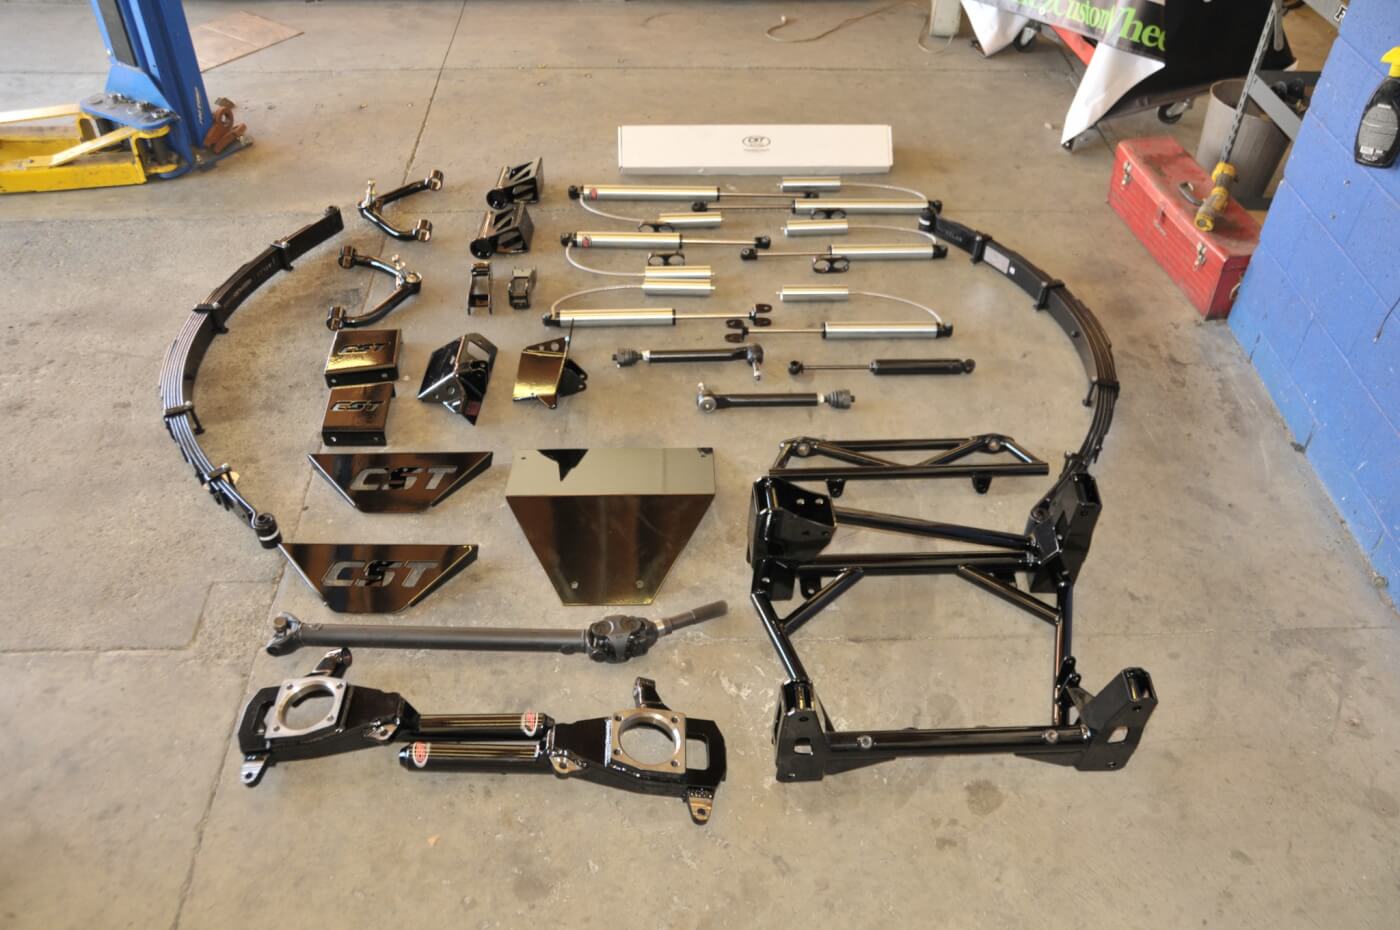 2. The 8-10-inch lift kit from CST Performance Suspension comes complete with everything you will need, including leaf springs, remote-reservoir shocks, a transmission shift cable extension, brake line extension brackets, and much, much more. The instructions that come with the kit are very complete and easily understood.